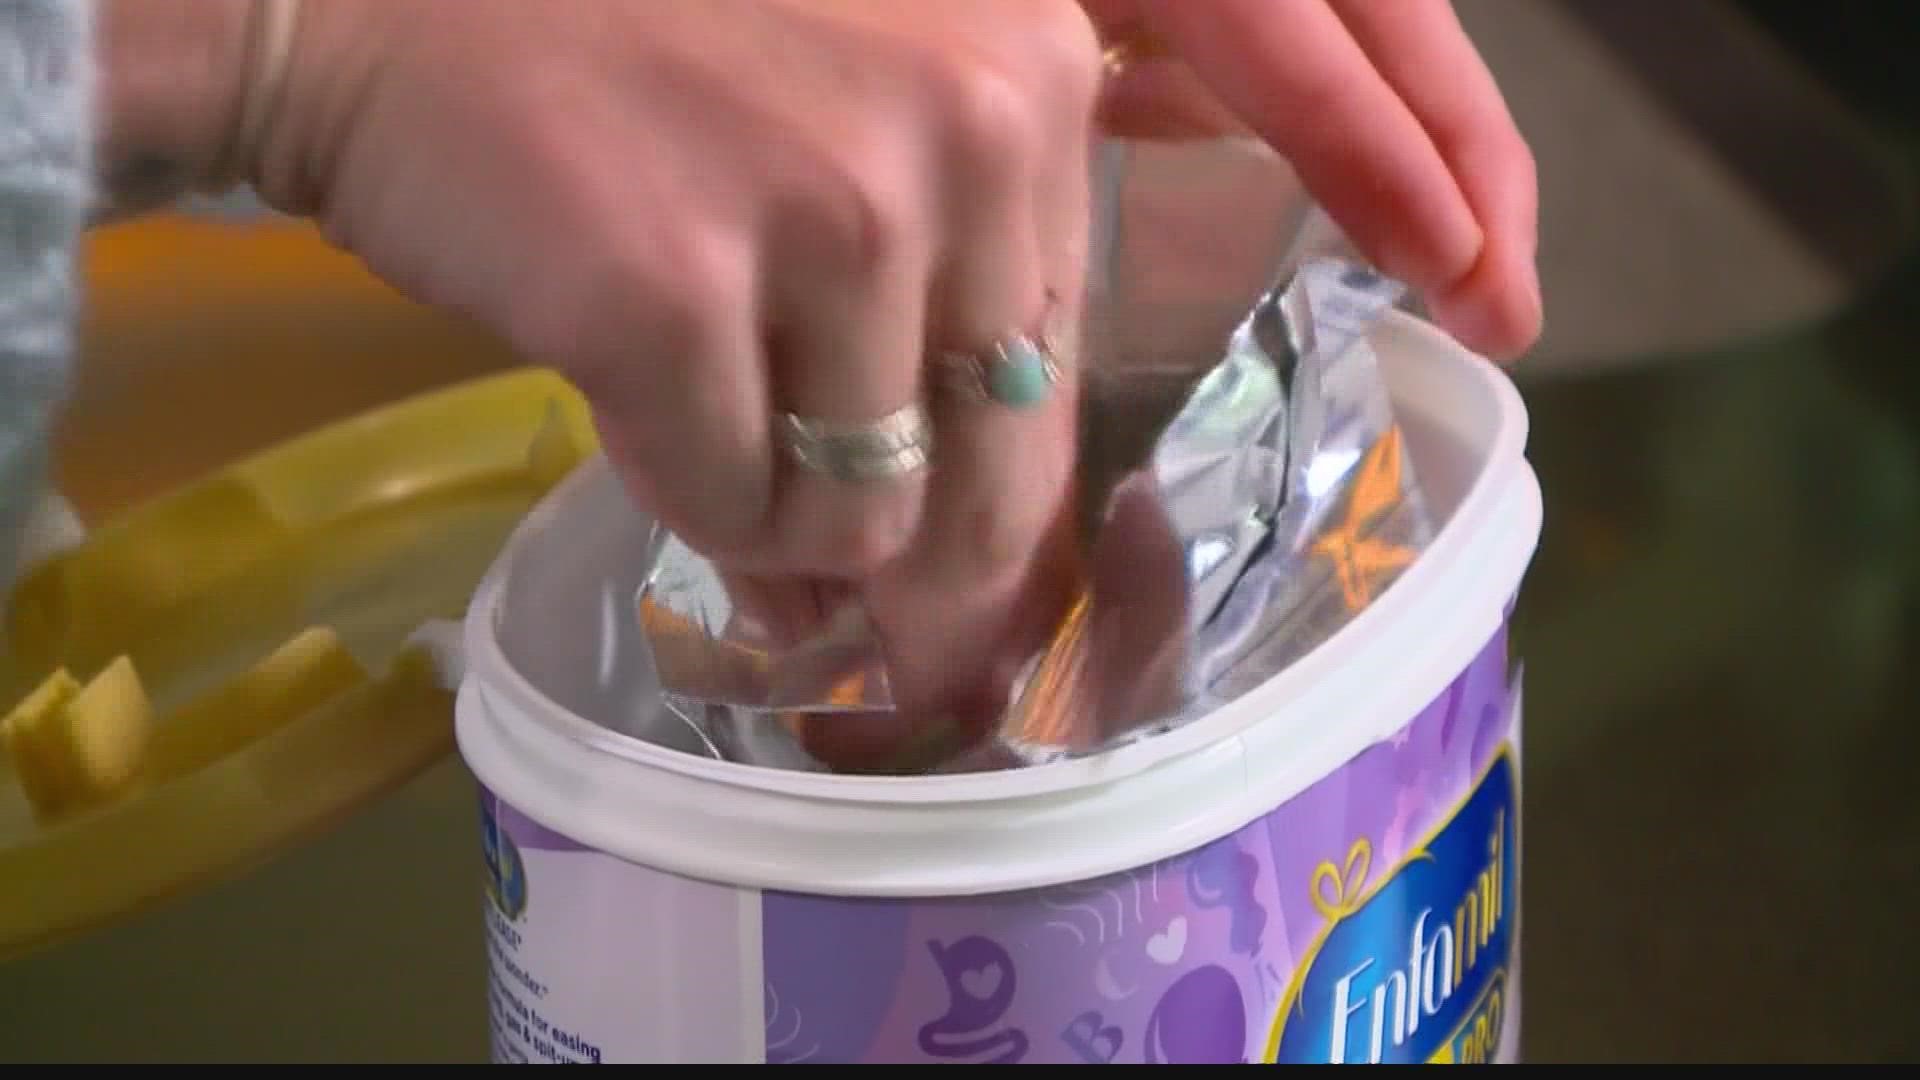 Parents are starting to become desperate, searching for baby formula to feed their child.